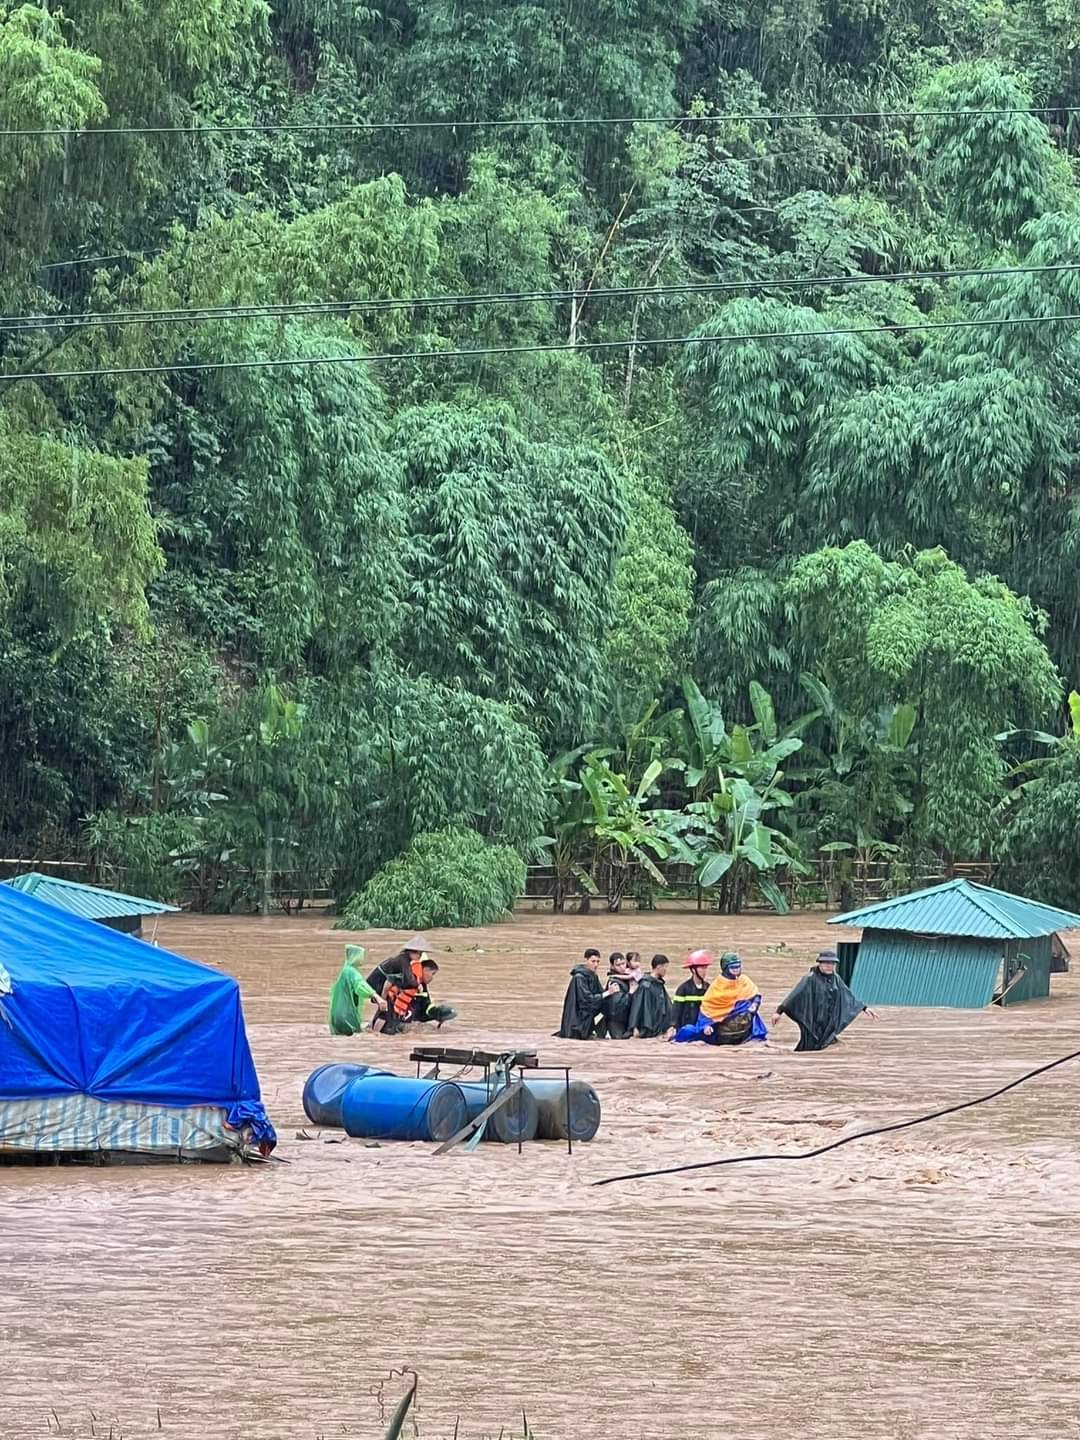 Son La mountain town was heavily flooded after heavy rain, soldiers evacuated people in torrential flood water - Photo 8.